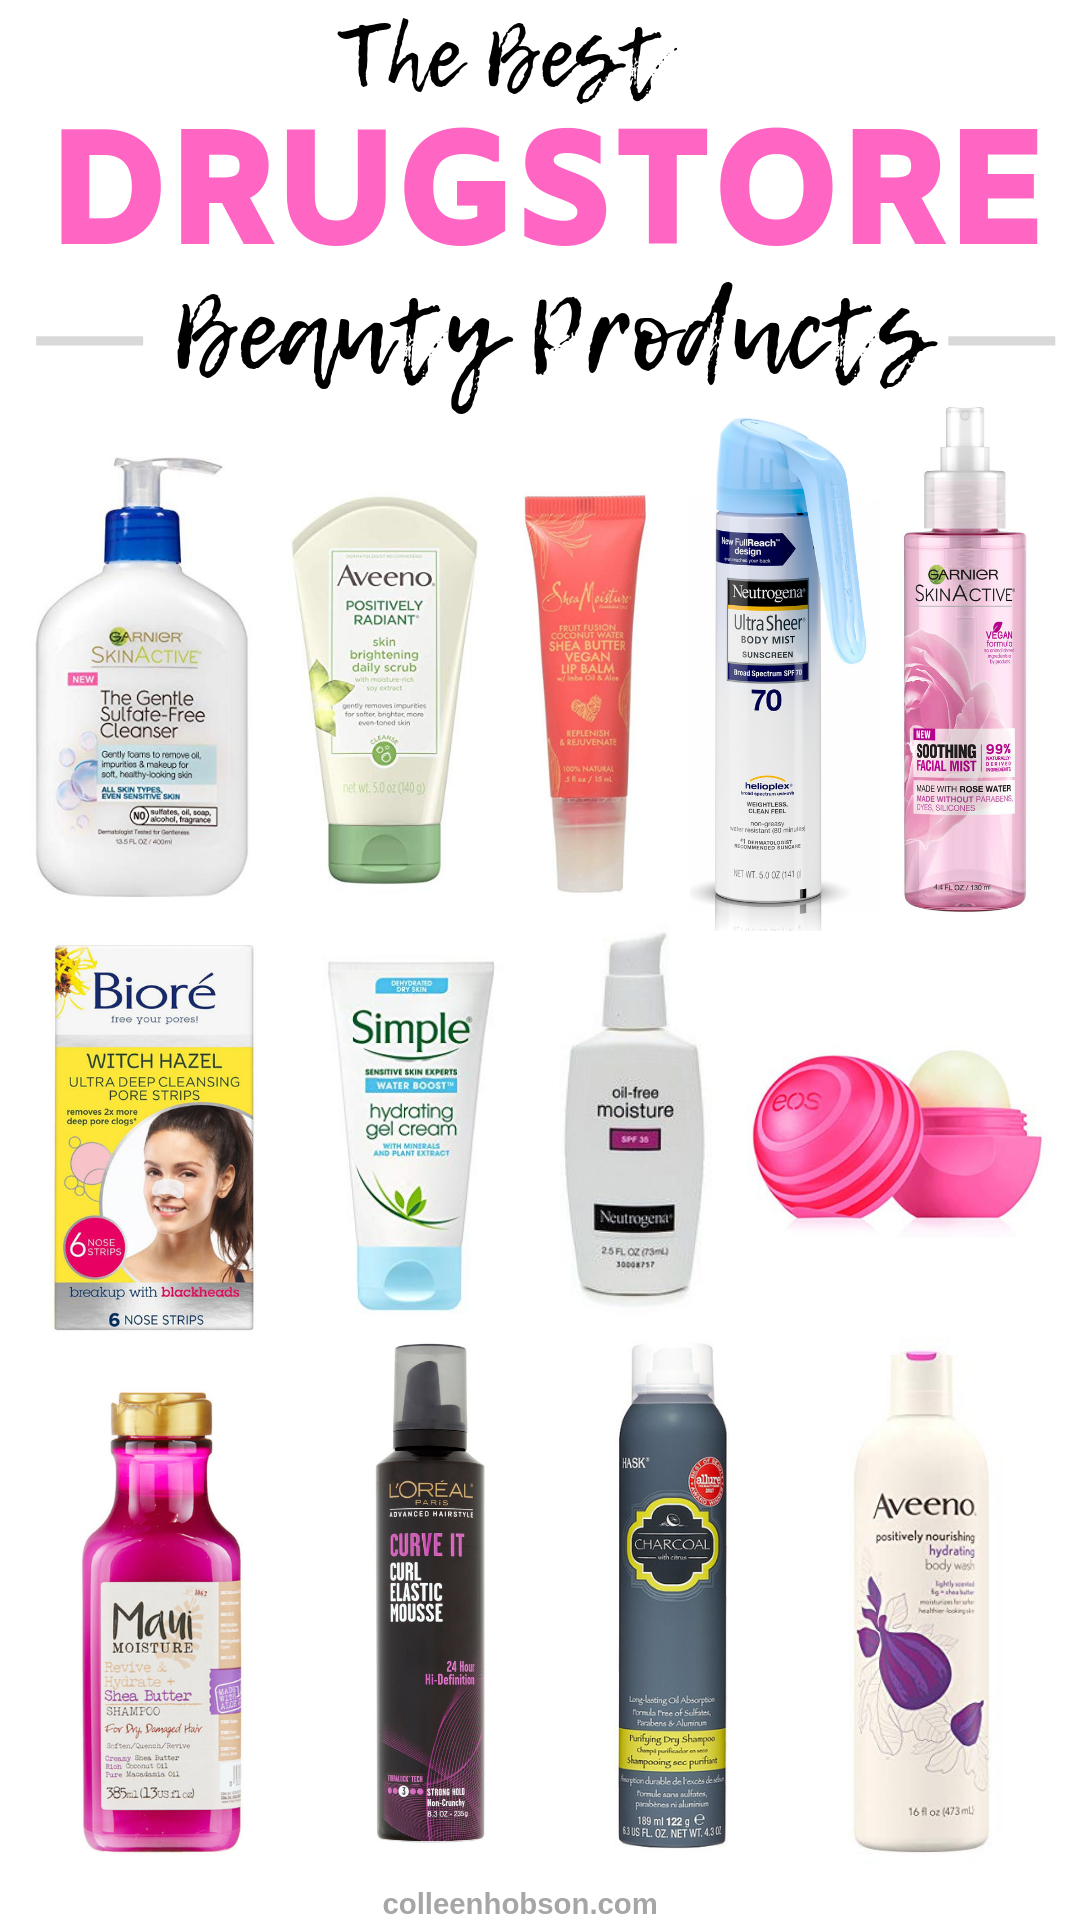 The Best Drugstore Beauty Products - The Best Drugstore Beauty Products -   14 beauty Care products ideas